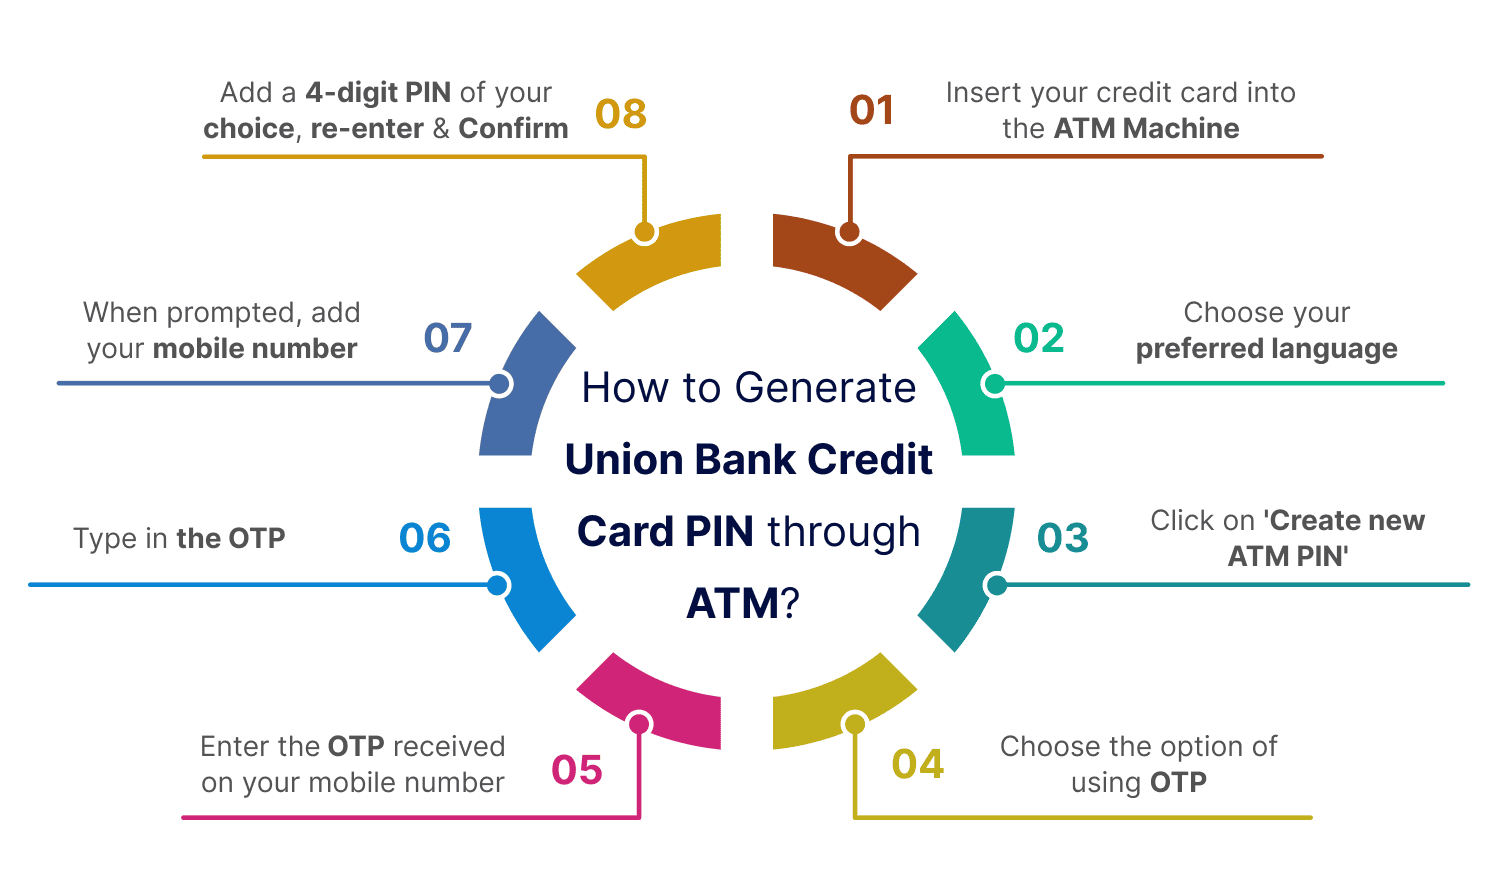 How to Generate Union Bank Credit Card PIN through ATM